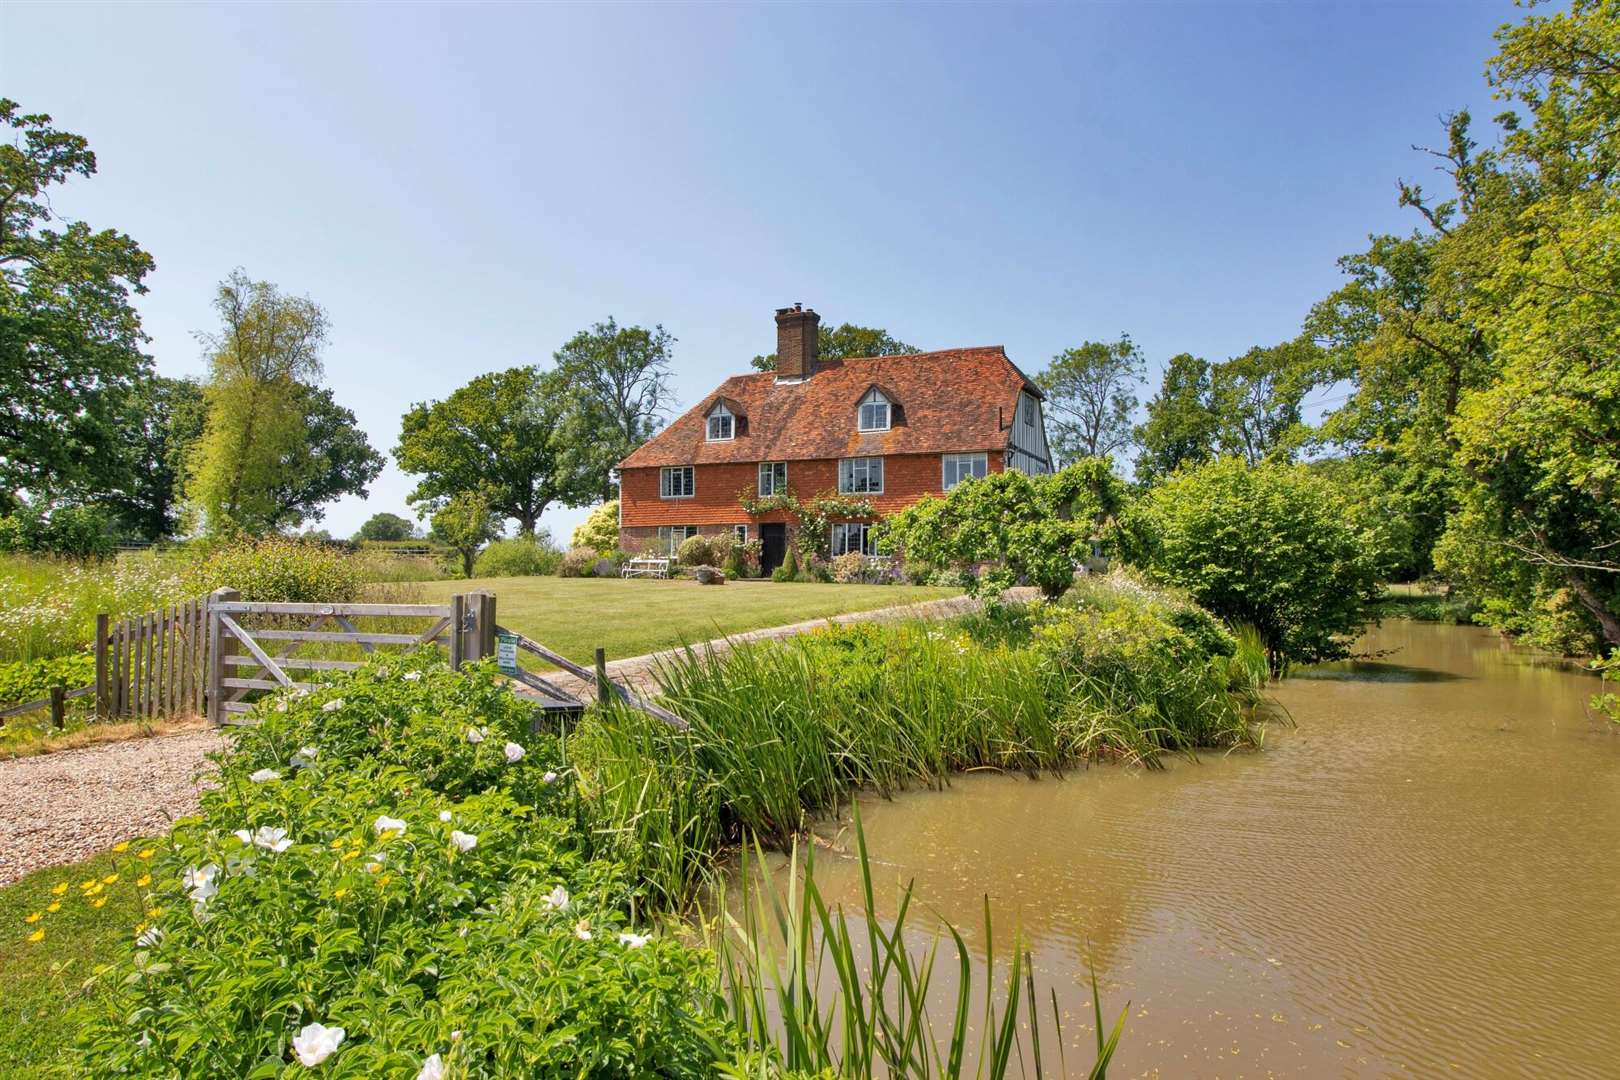 The six-bedroom manor on the outskirts of Biddenden, near Tenterden, is surrounded by a moat